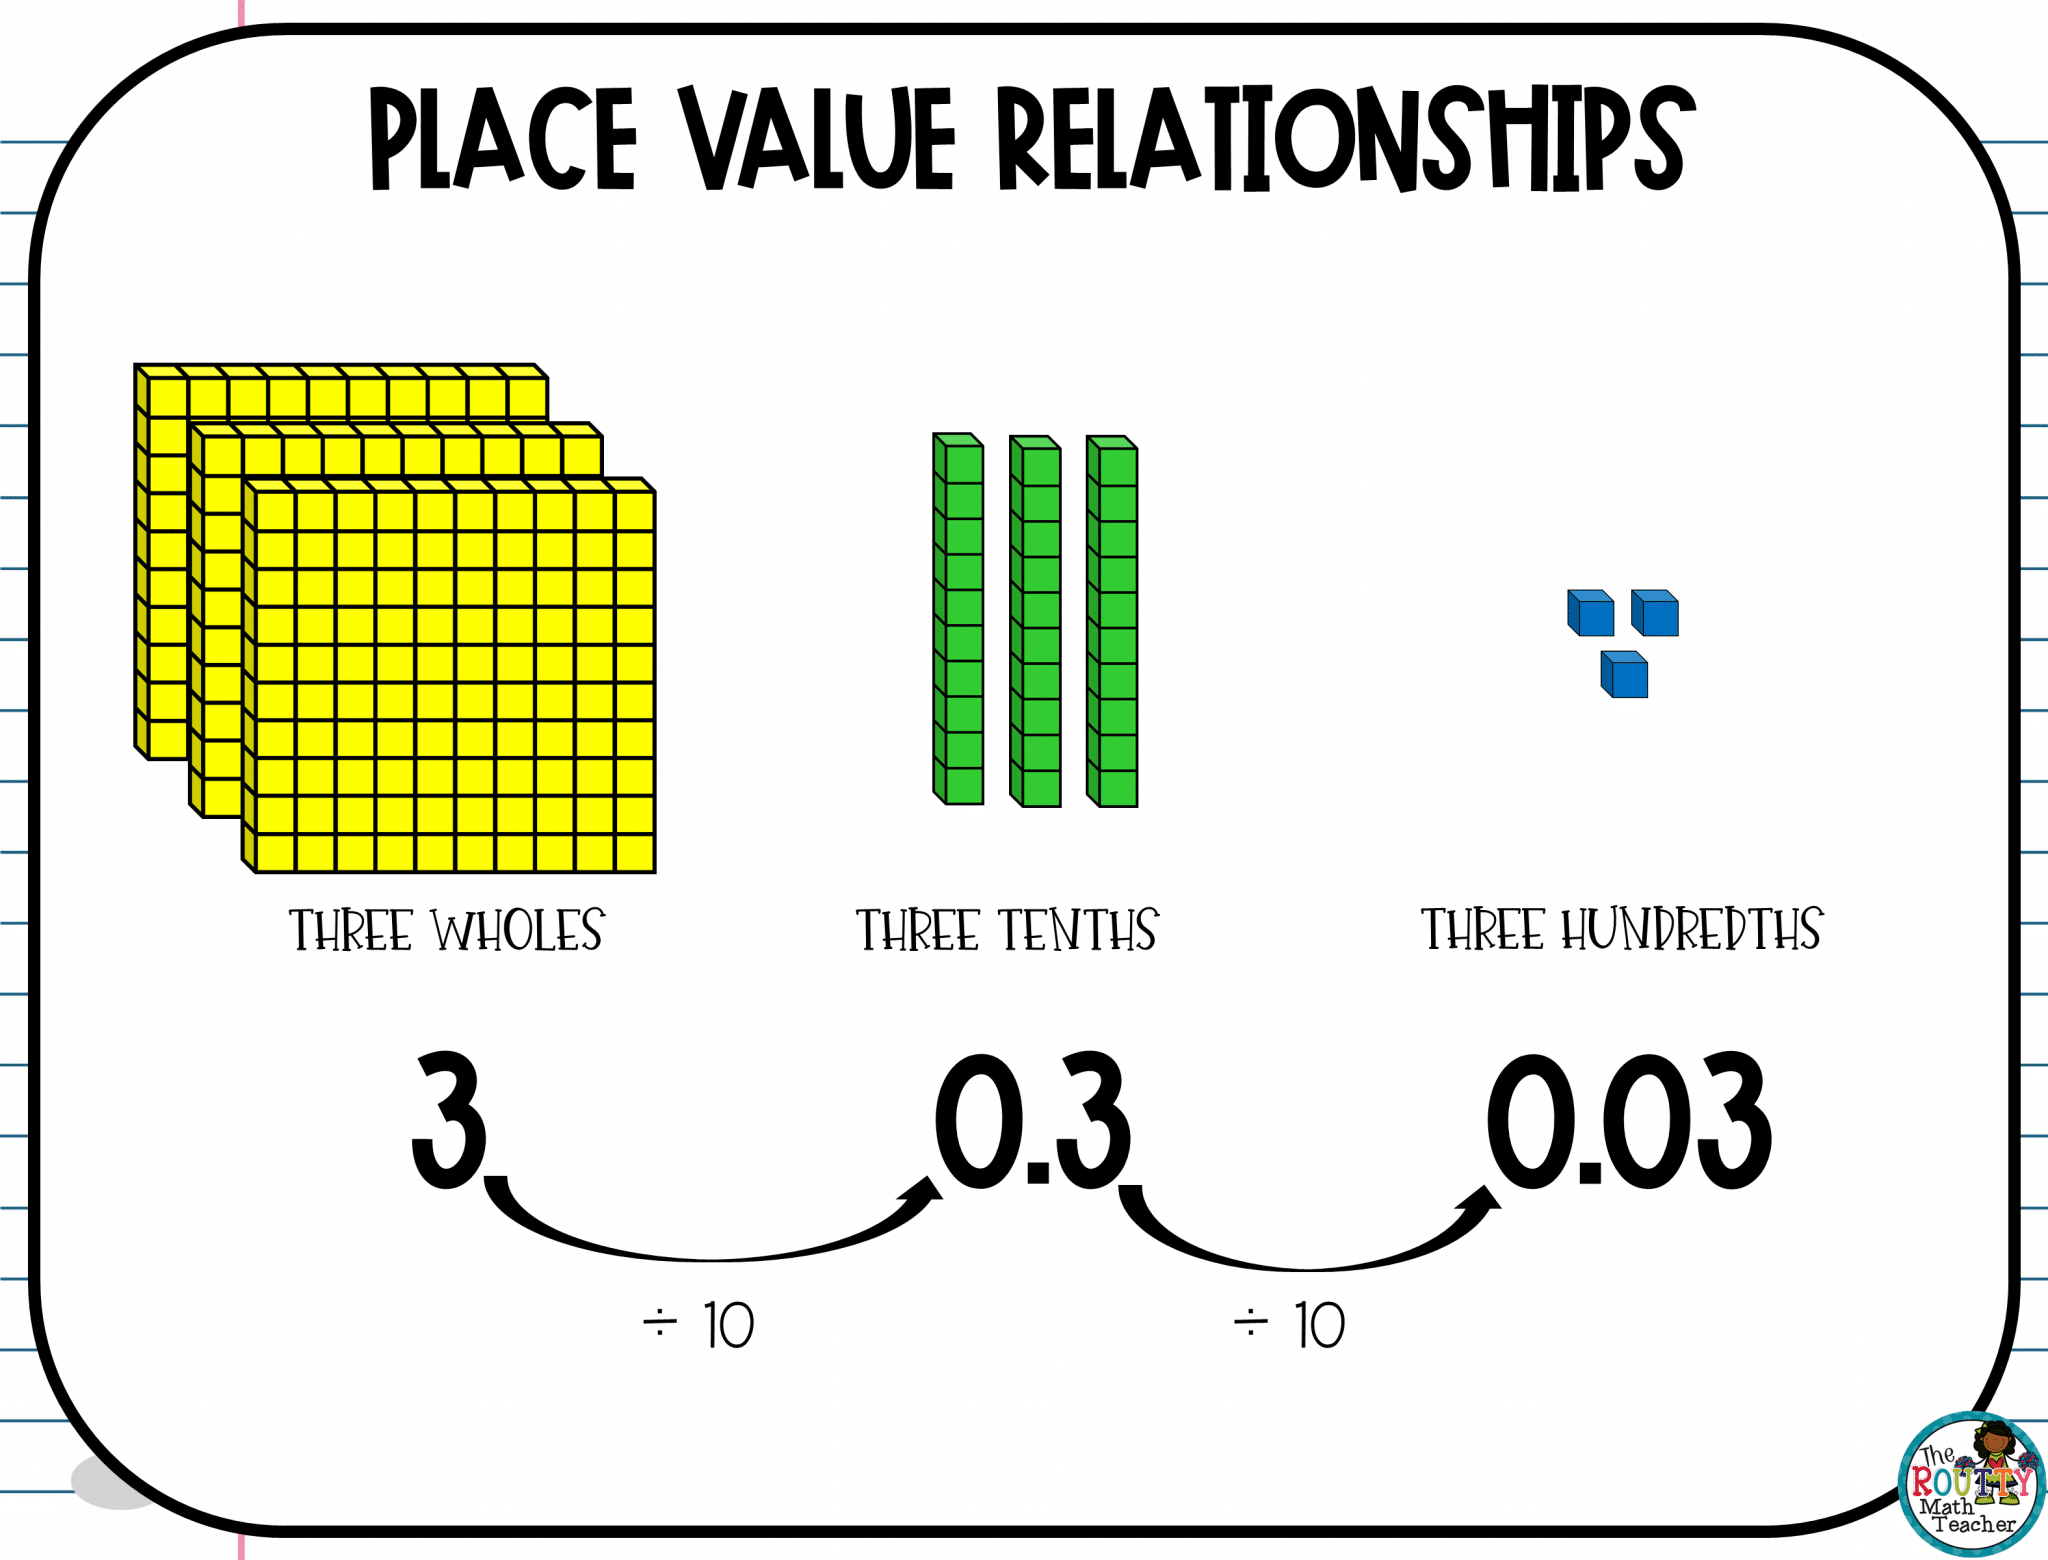 place-value-relationships-the-routty-math-teacher